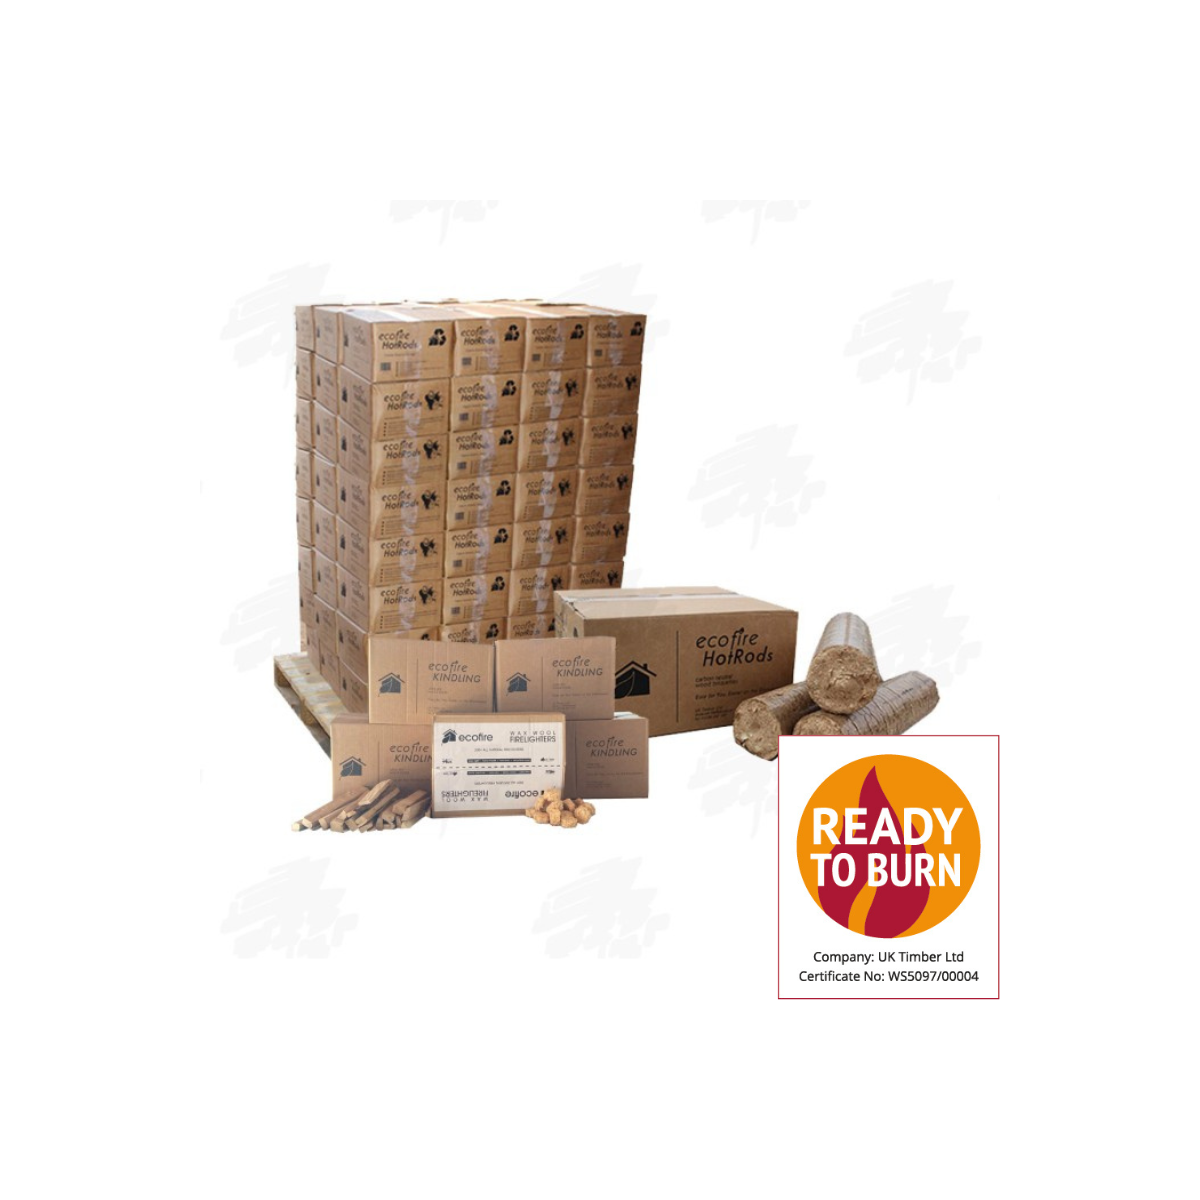 Single Box of Ecofire HotRods  Buy Wood Briquettes Online from the Experts  at UK Timber